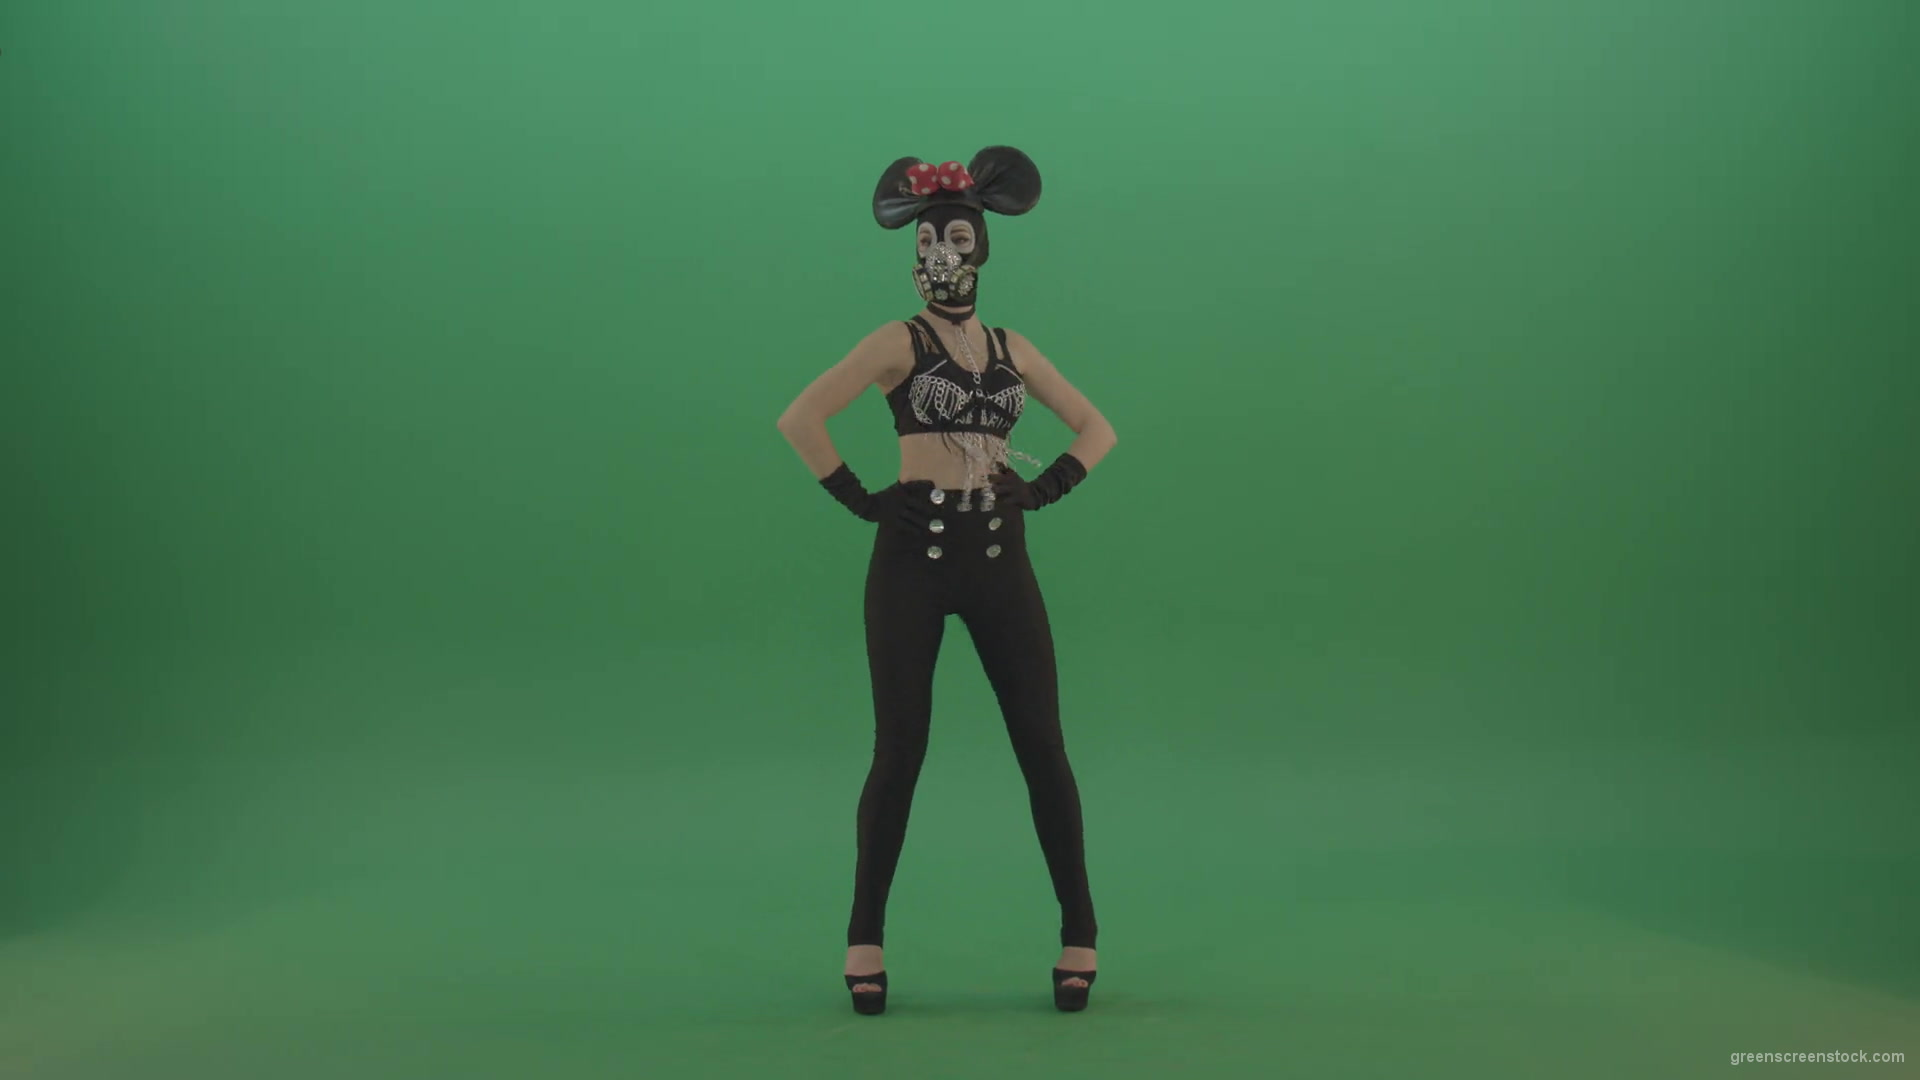 Full-size-strip-girl-in-mouse-costume-and-mask-shaking-ass-and-dancing-on-green-screen-1920_002 Green Screen Stock